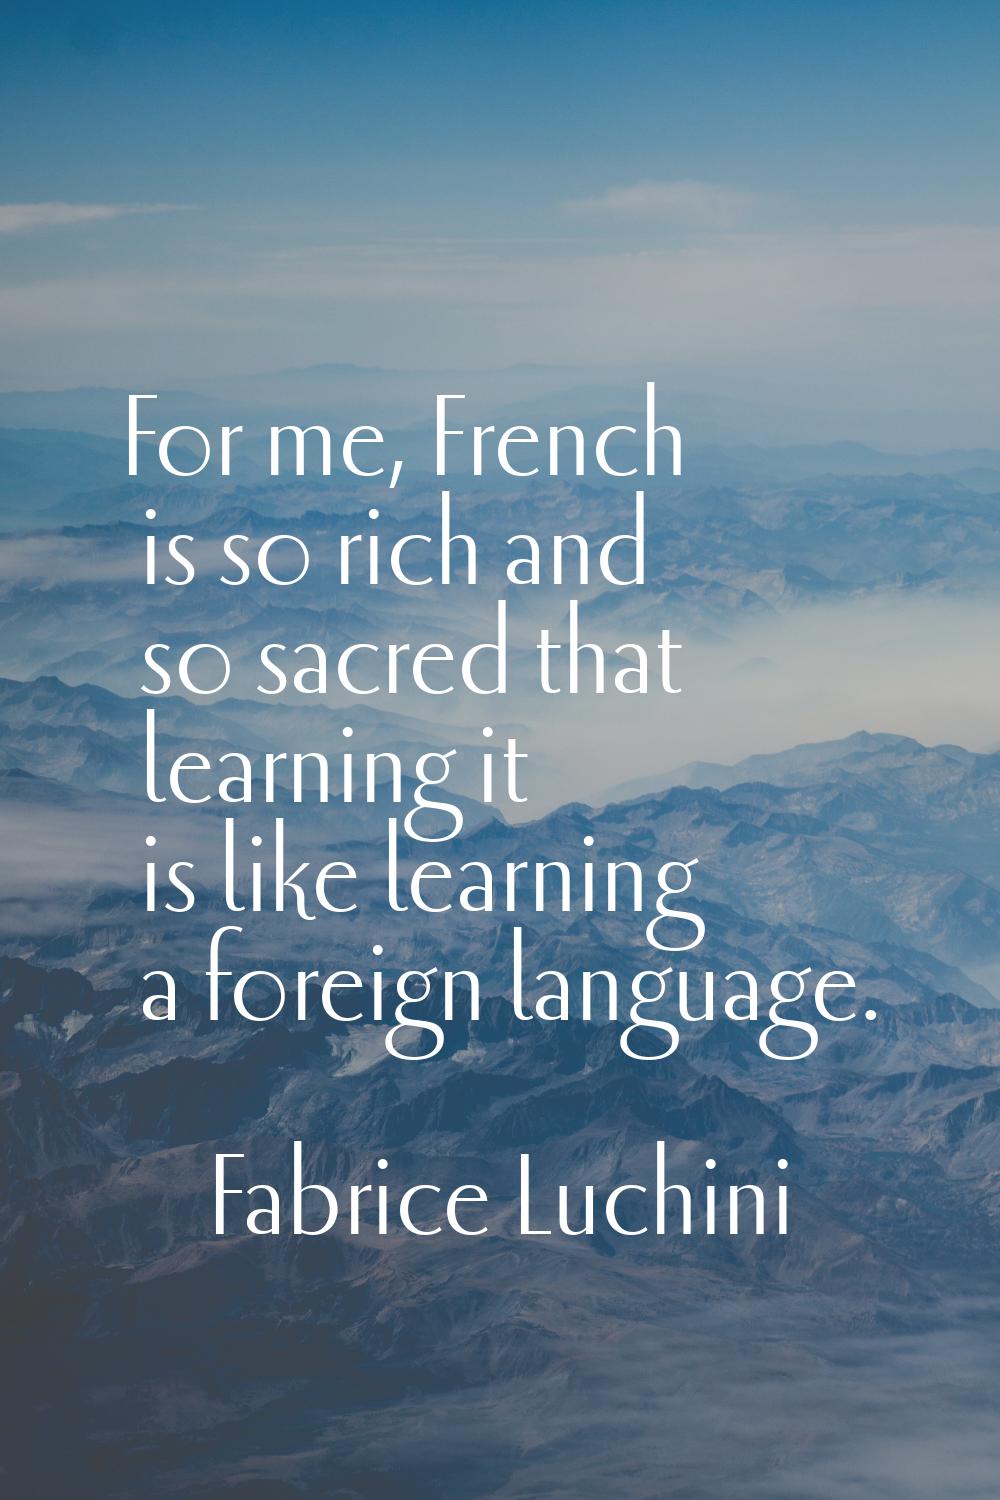 For me, French is so rich and so sacred that learning it is like learning a foreign language.